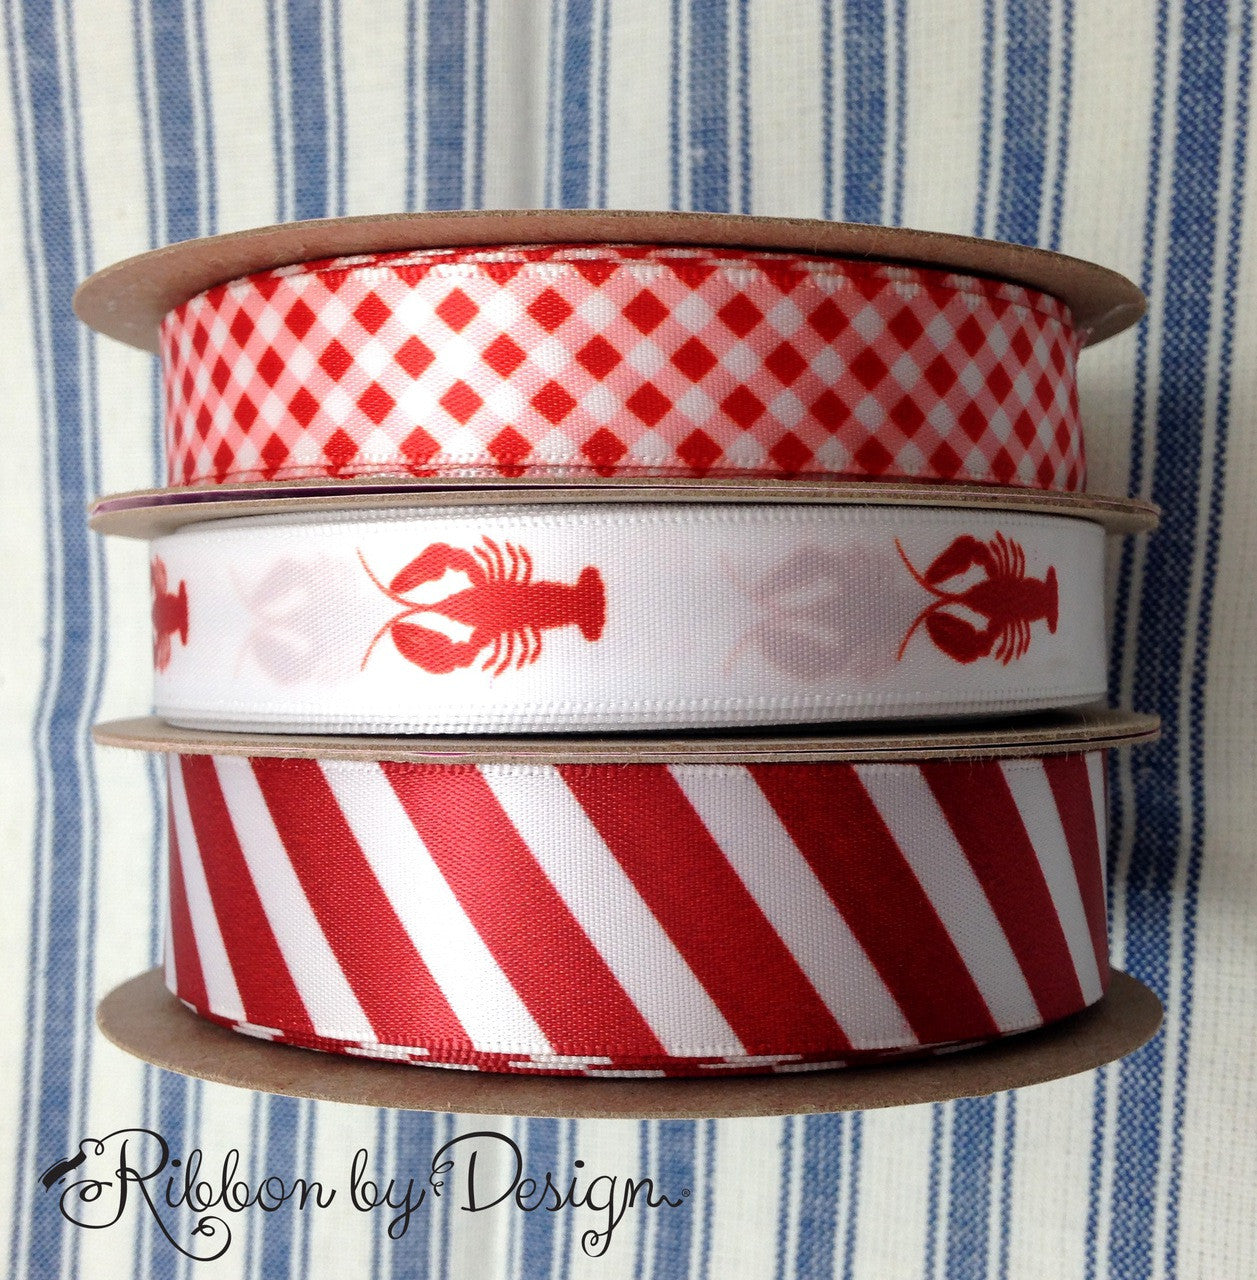 Our Red and White collection includes this wonderful Summer theme with lobsters, stripes and gingham checks. Make your Summer party so much fun by tying favors with any of these ribbons! Designed and printed in the USA